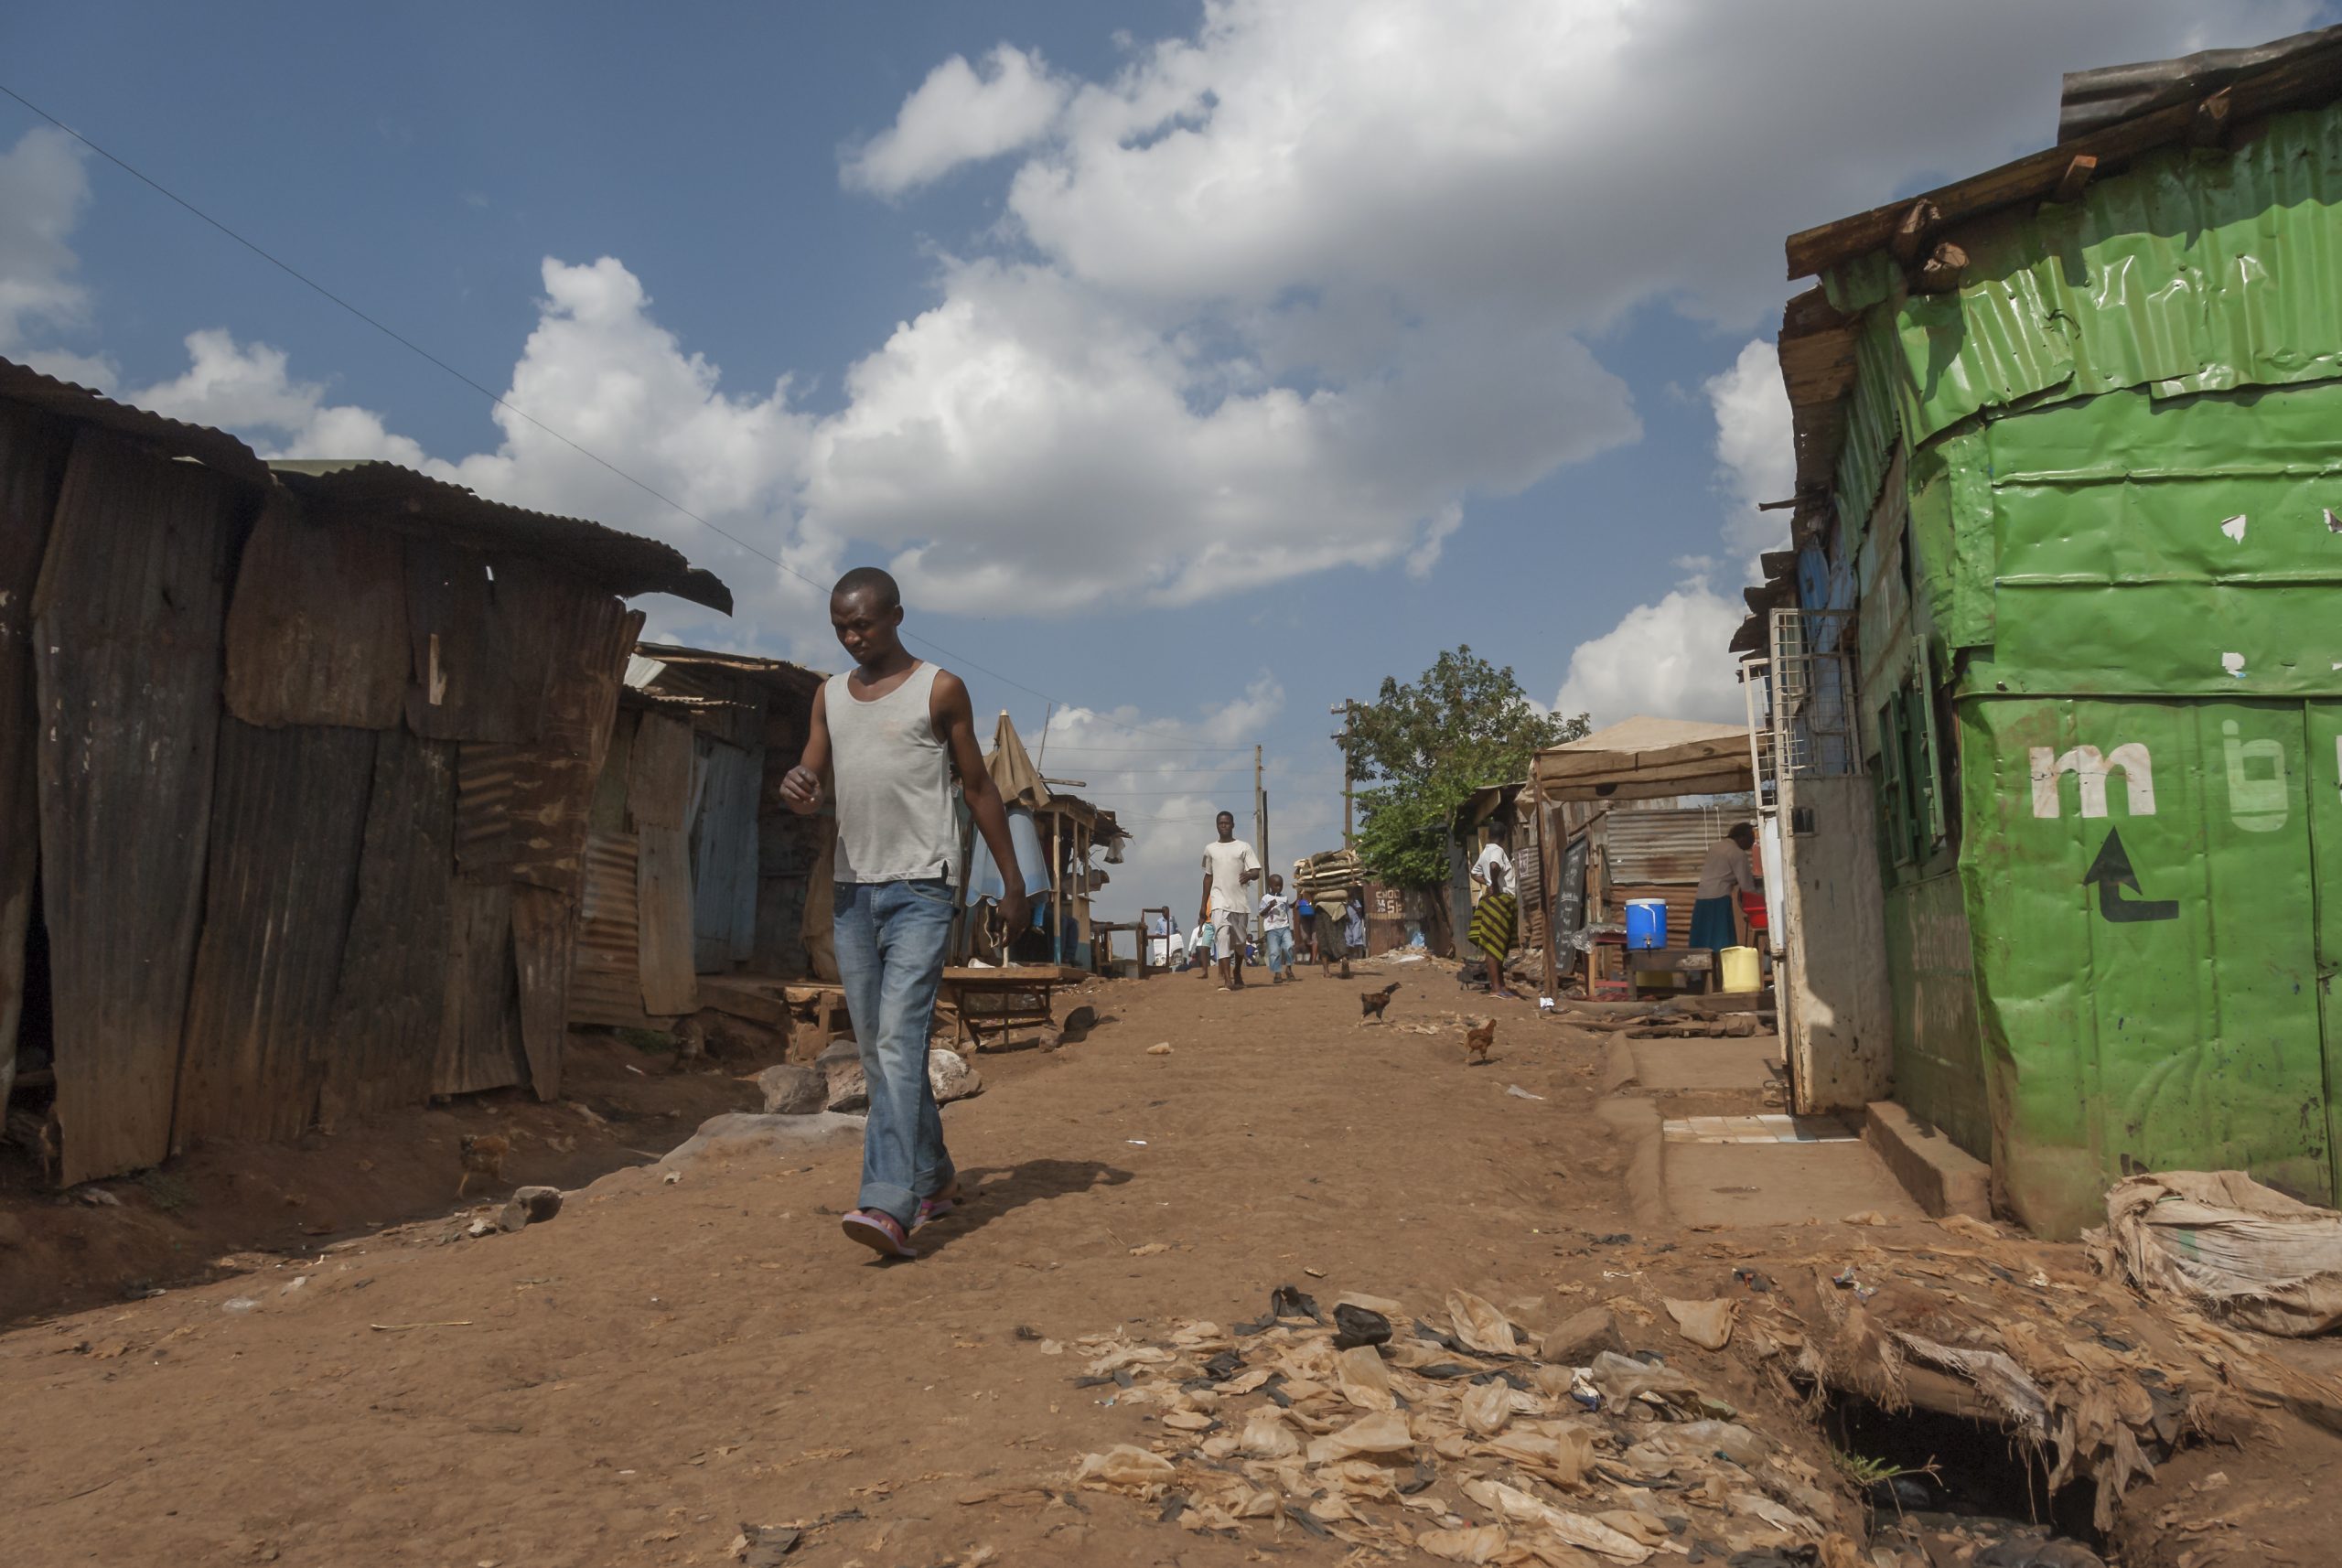 Unmet Needs and Resilience: The Case of Vulnerable and Marginalized Populations in Nairobi’s Informal Settlements